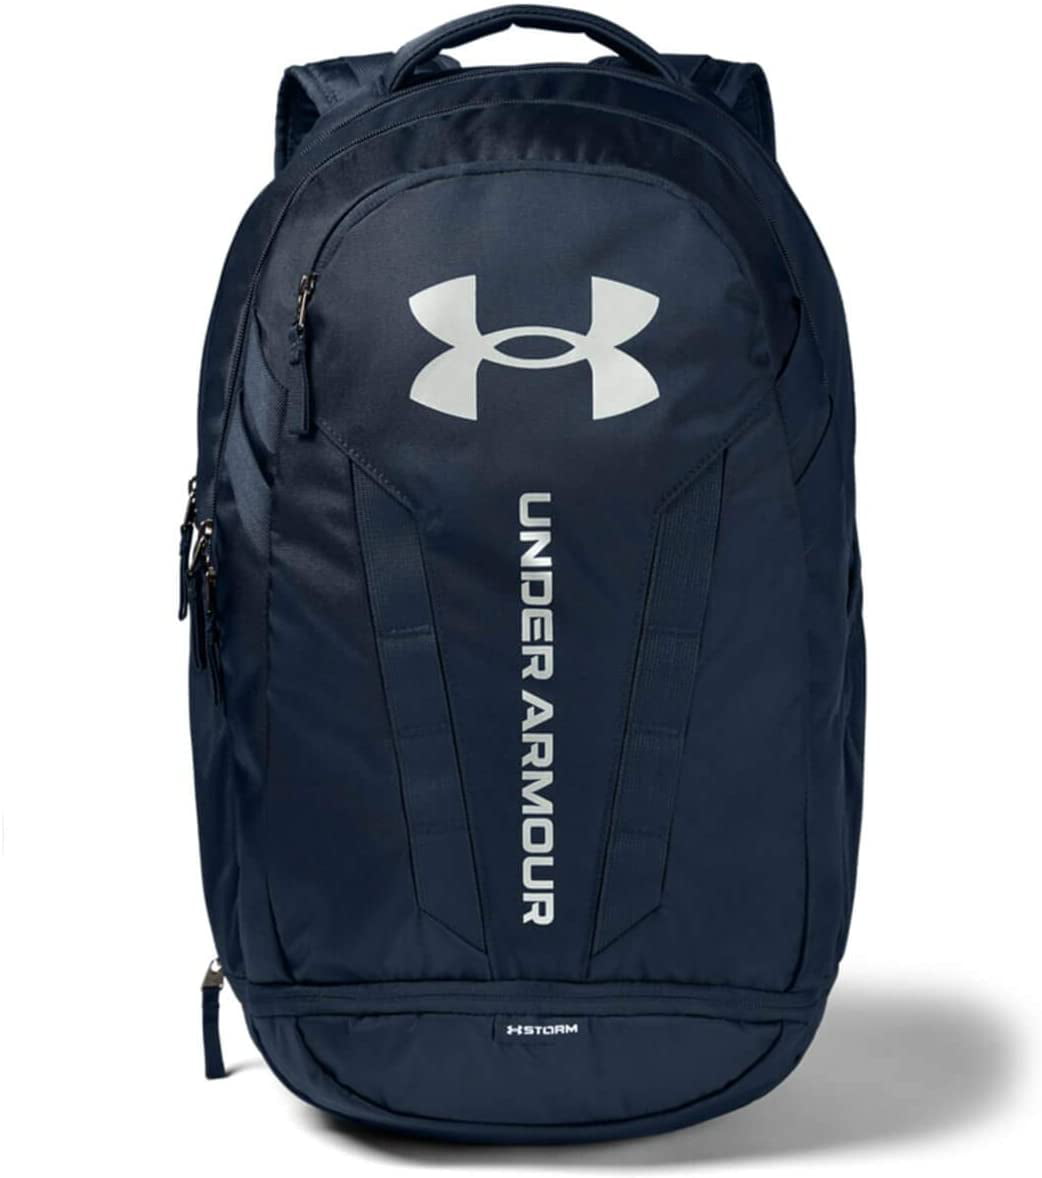 Under Armour Hustle Backpack Black 002 /Black One Size Fits All 